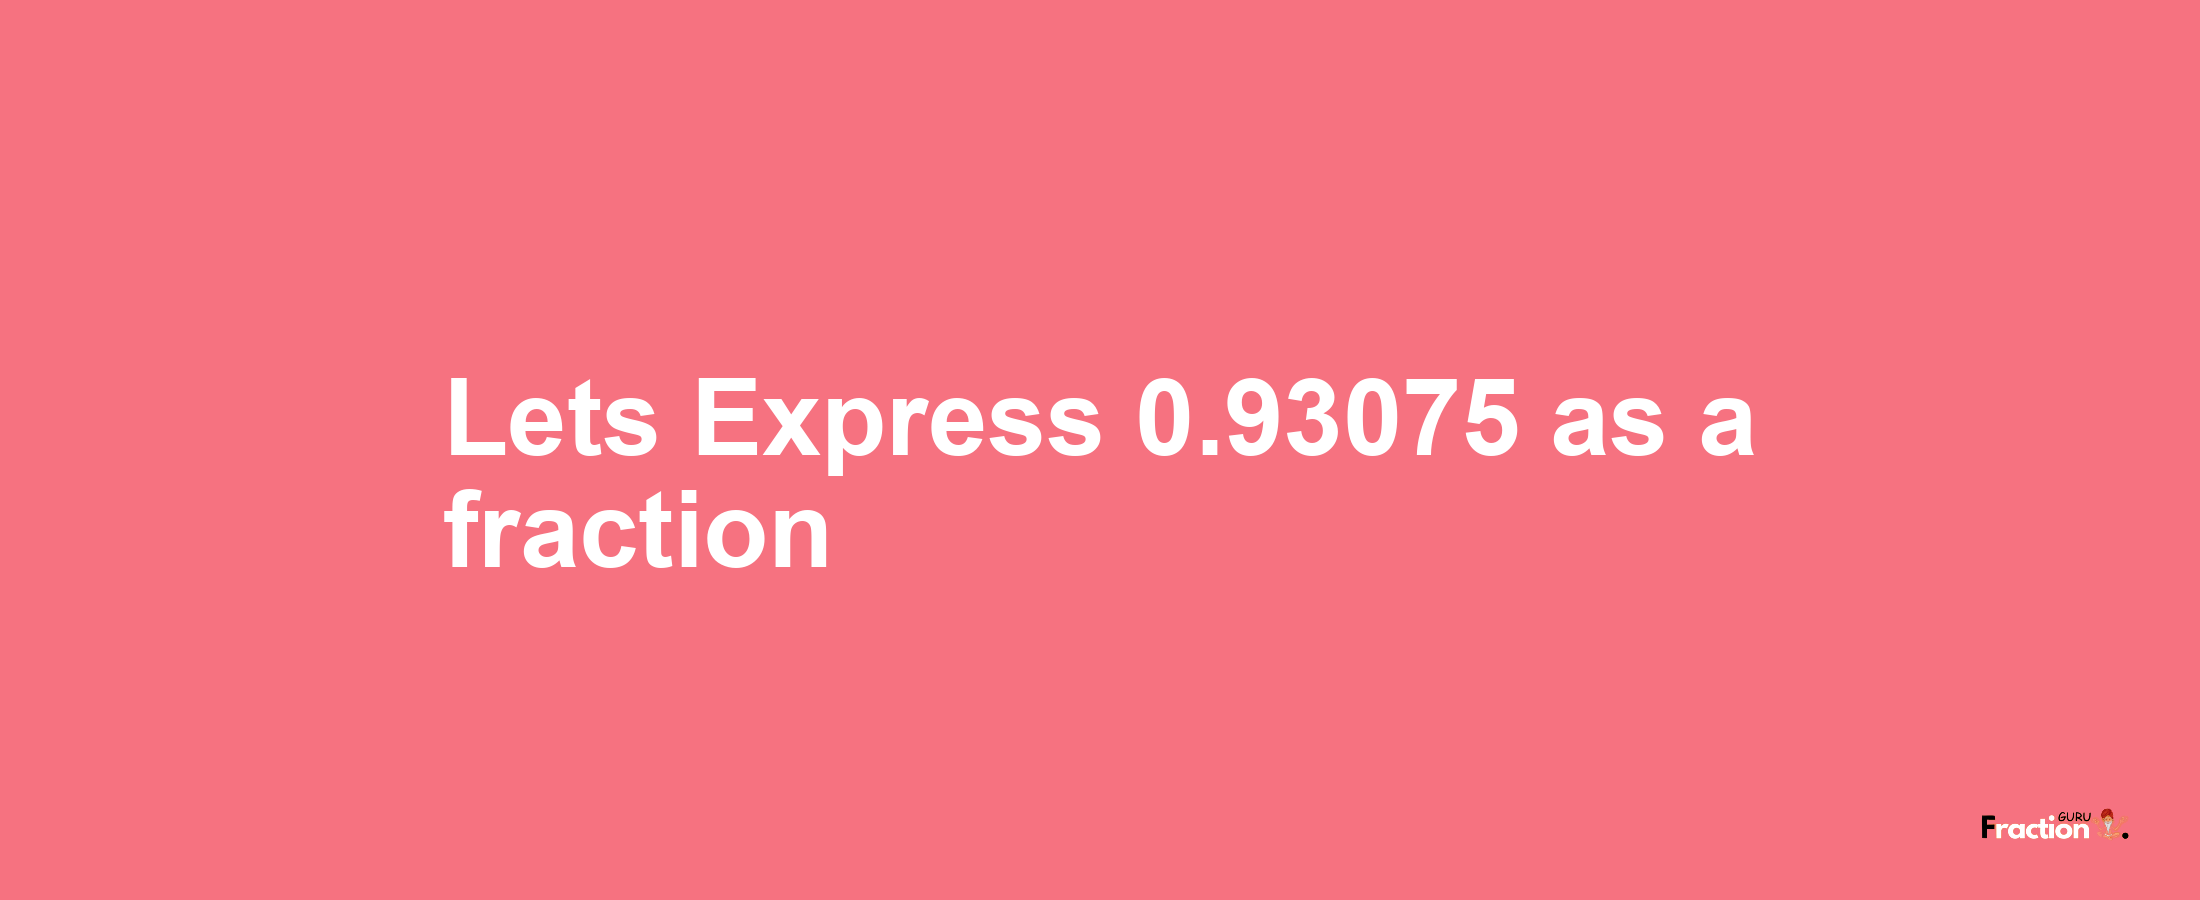 Lets Express 0.93075 as afraction